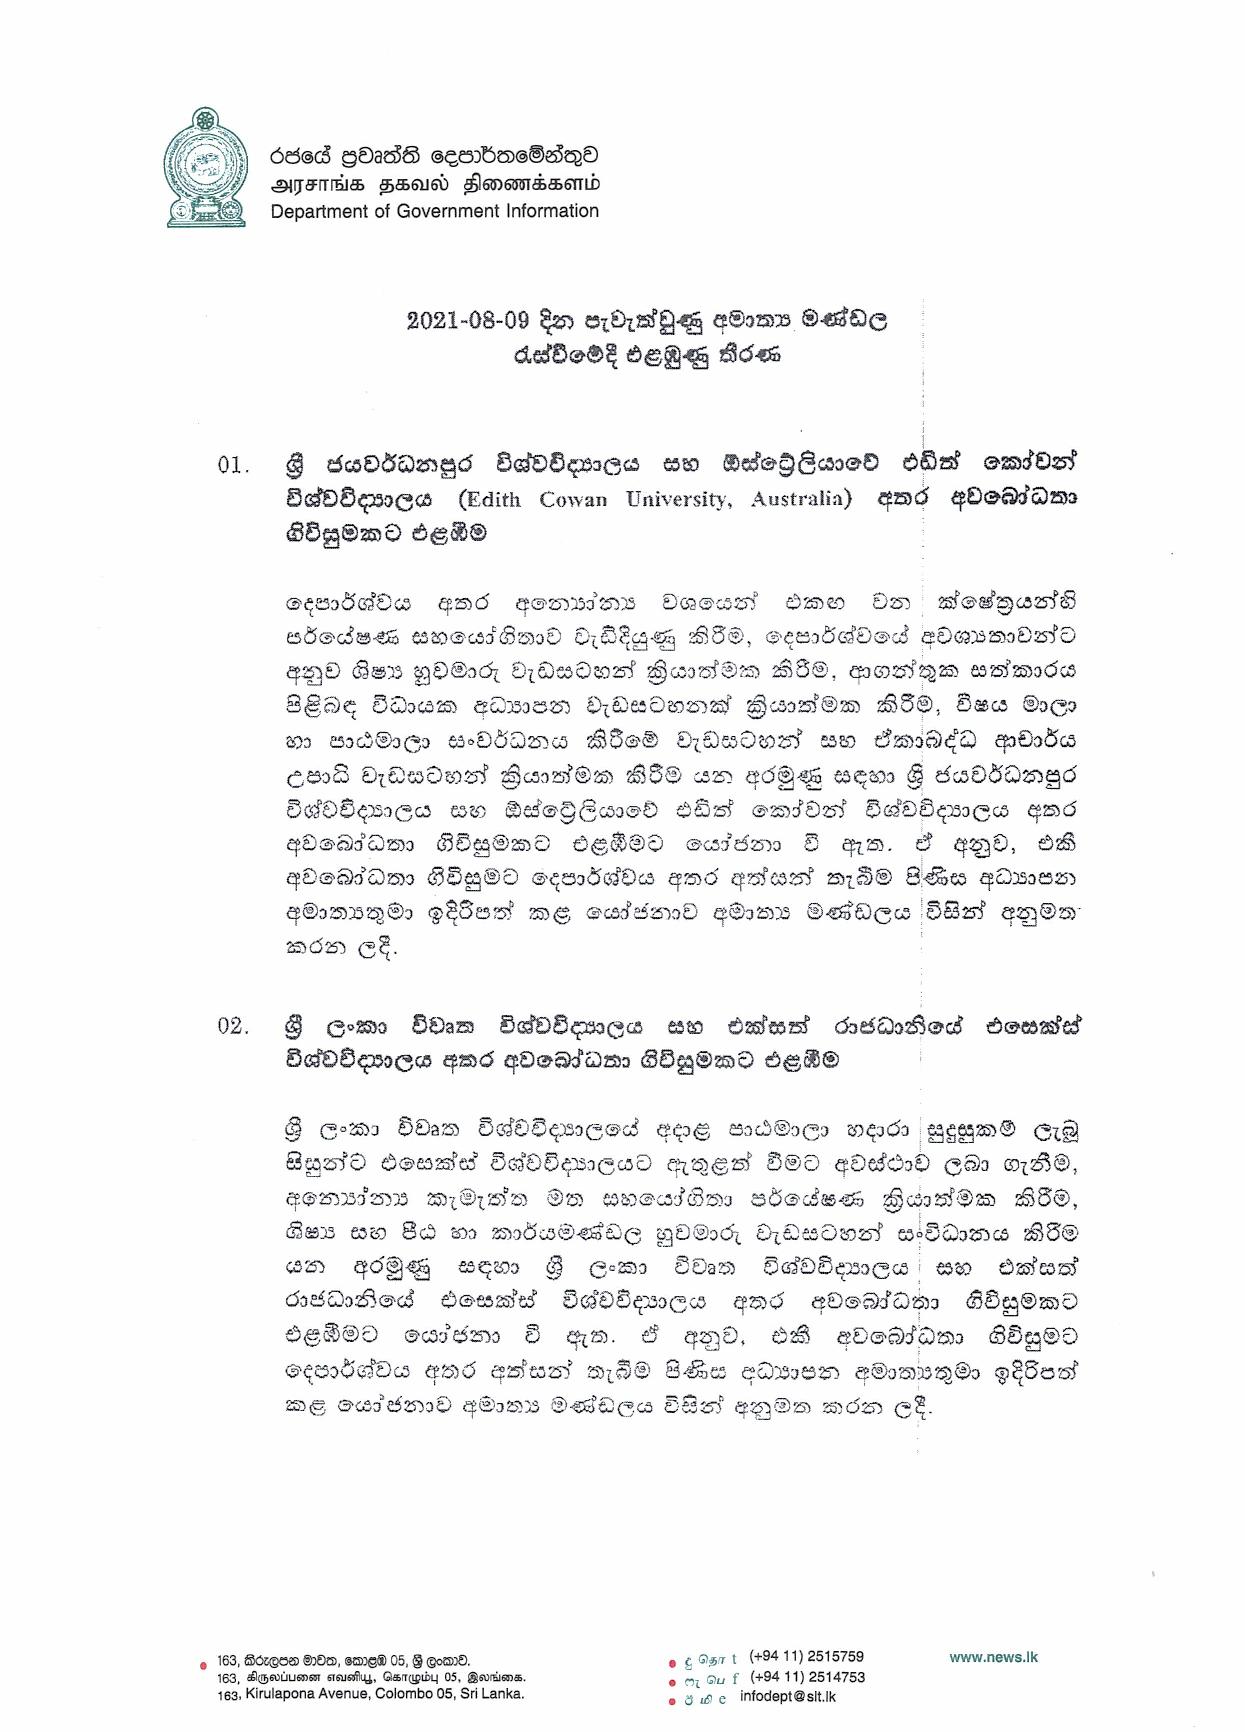 Cabinet Decision on 09.08.2021 page 001